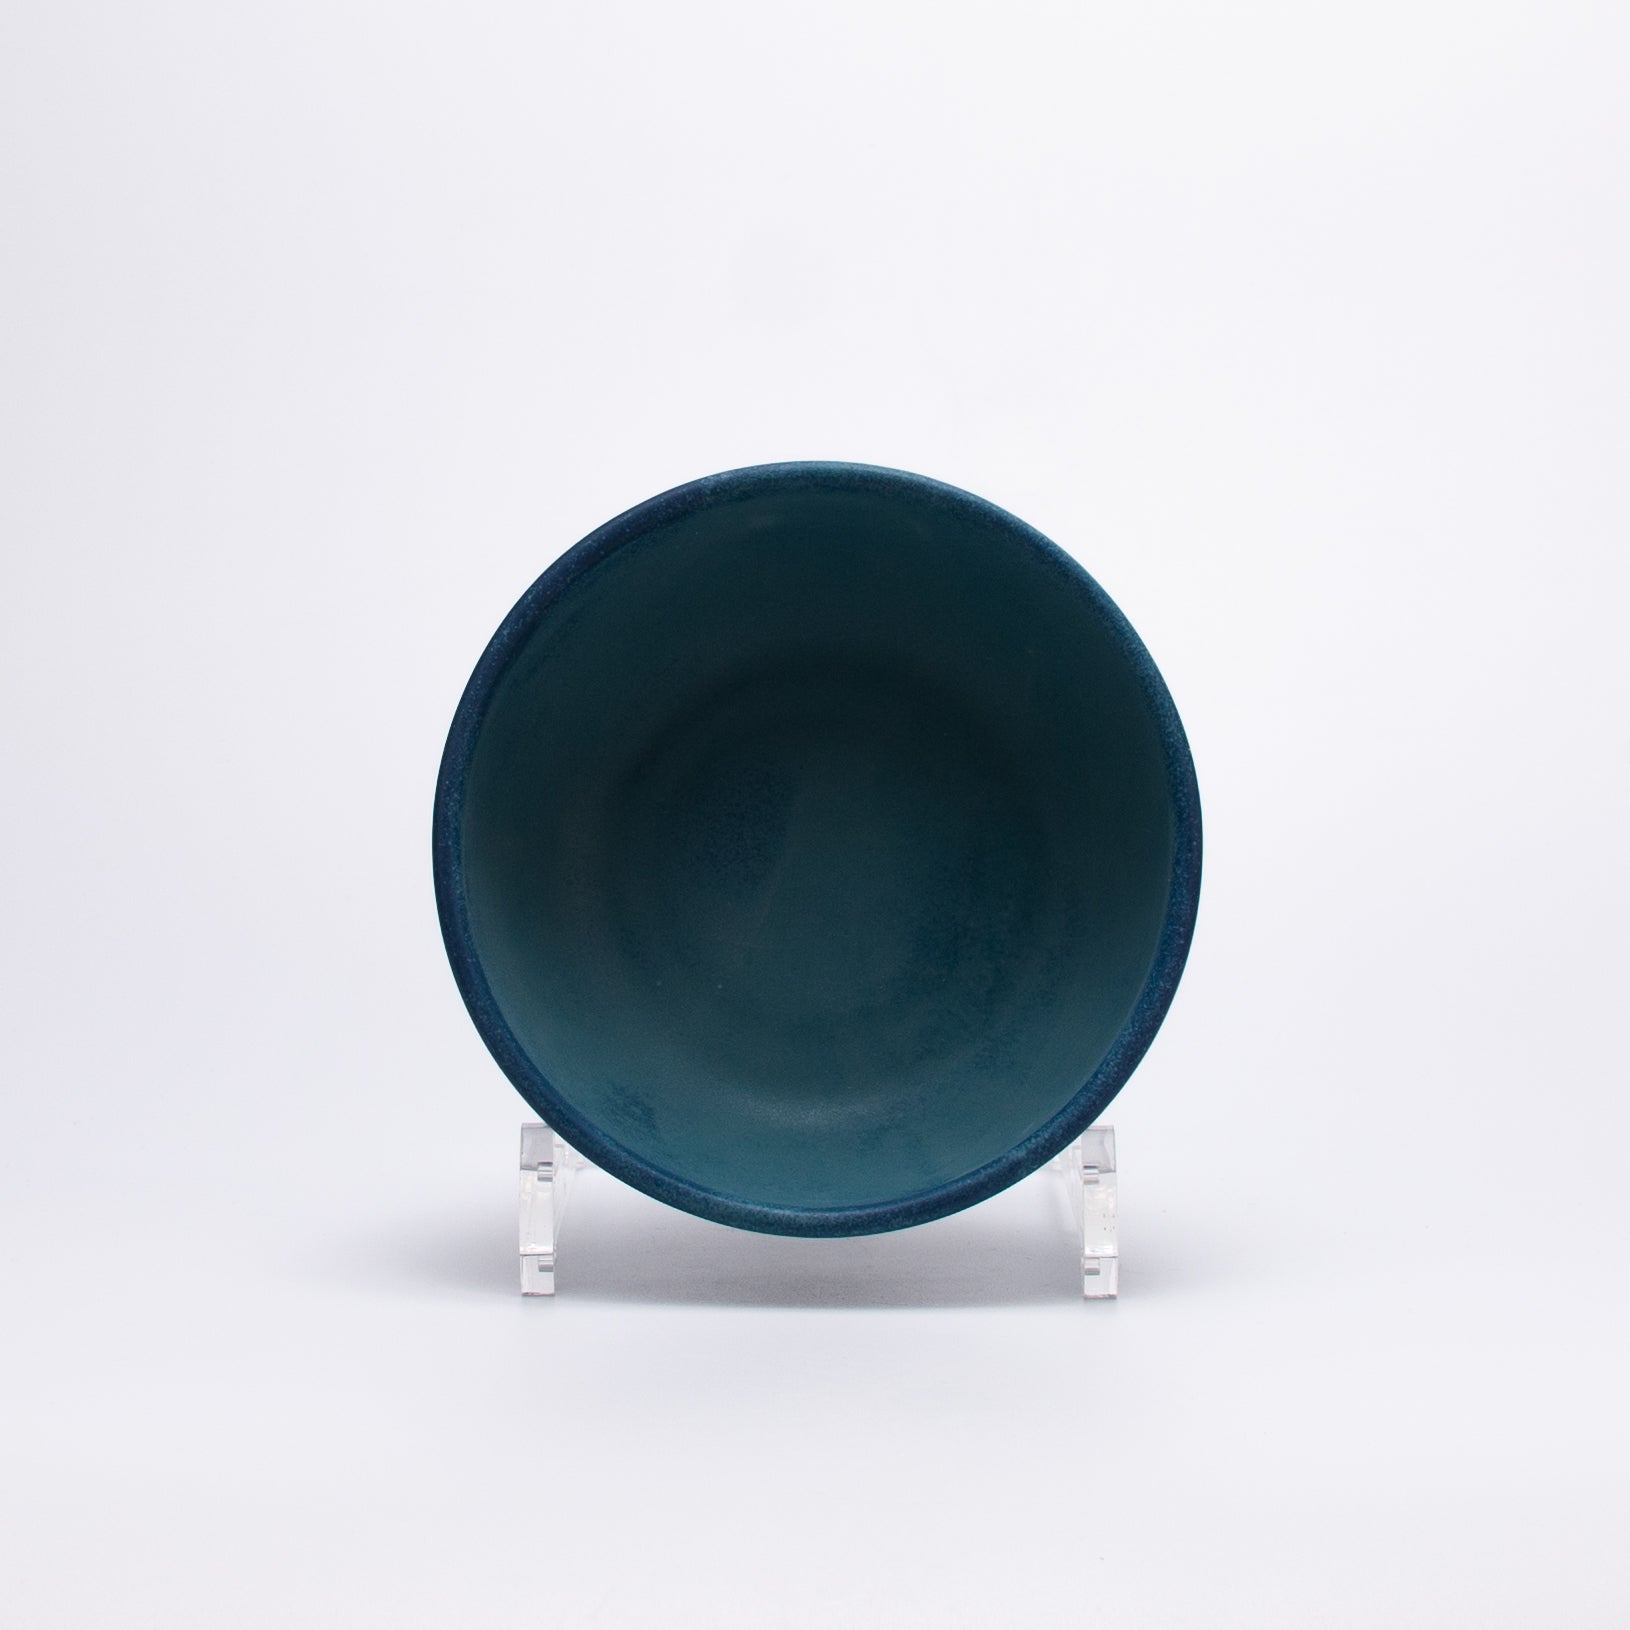 Space blue plates and bowls